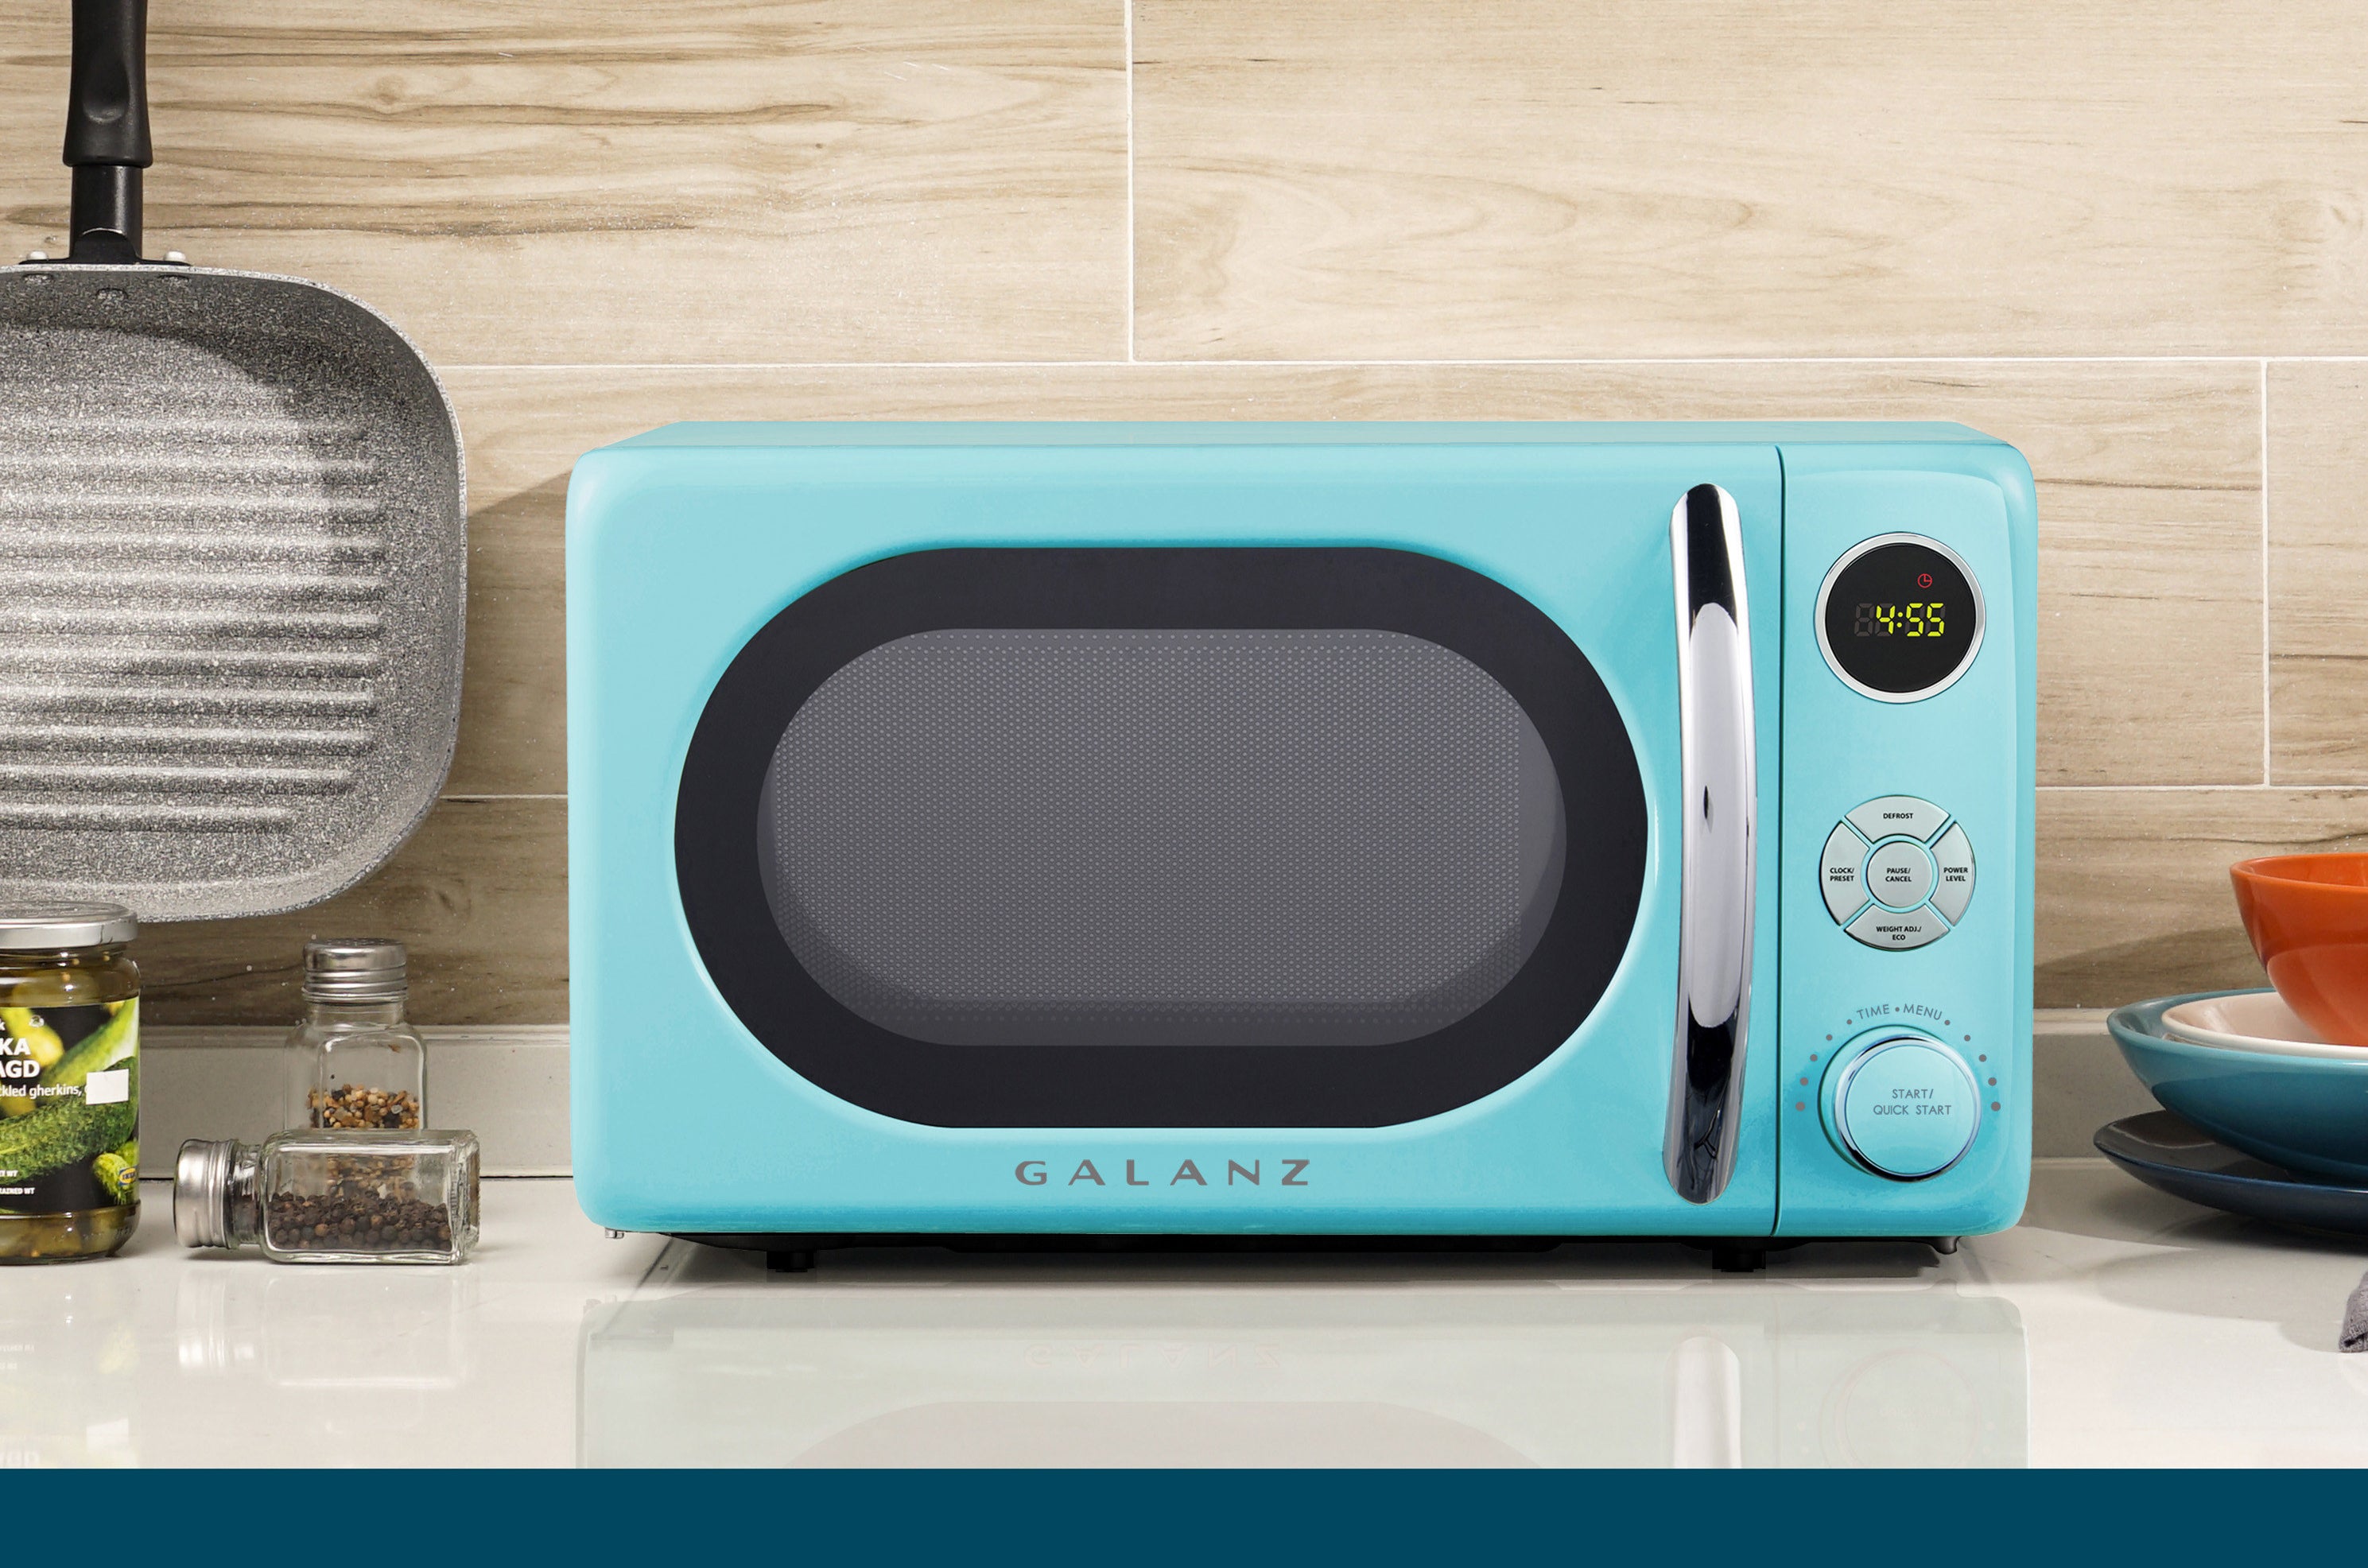 The blue retro-style countertop microwave oven